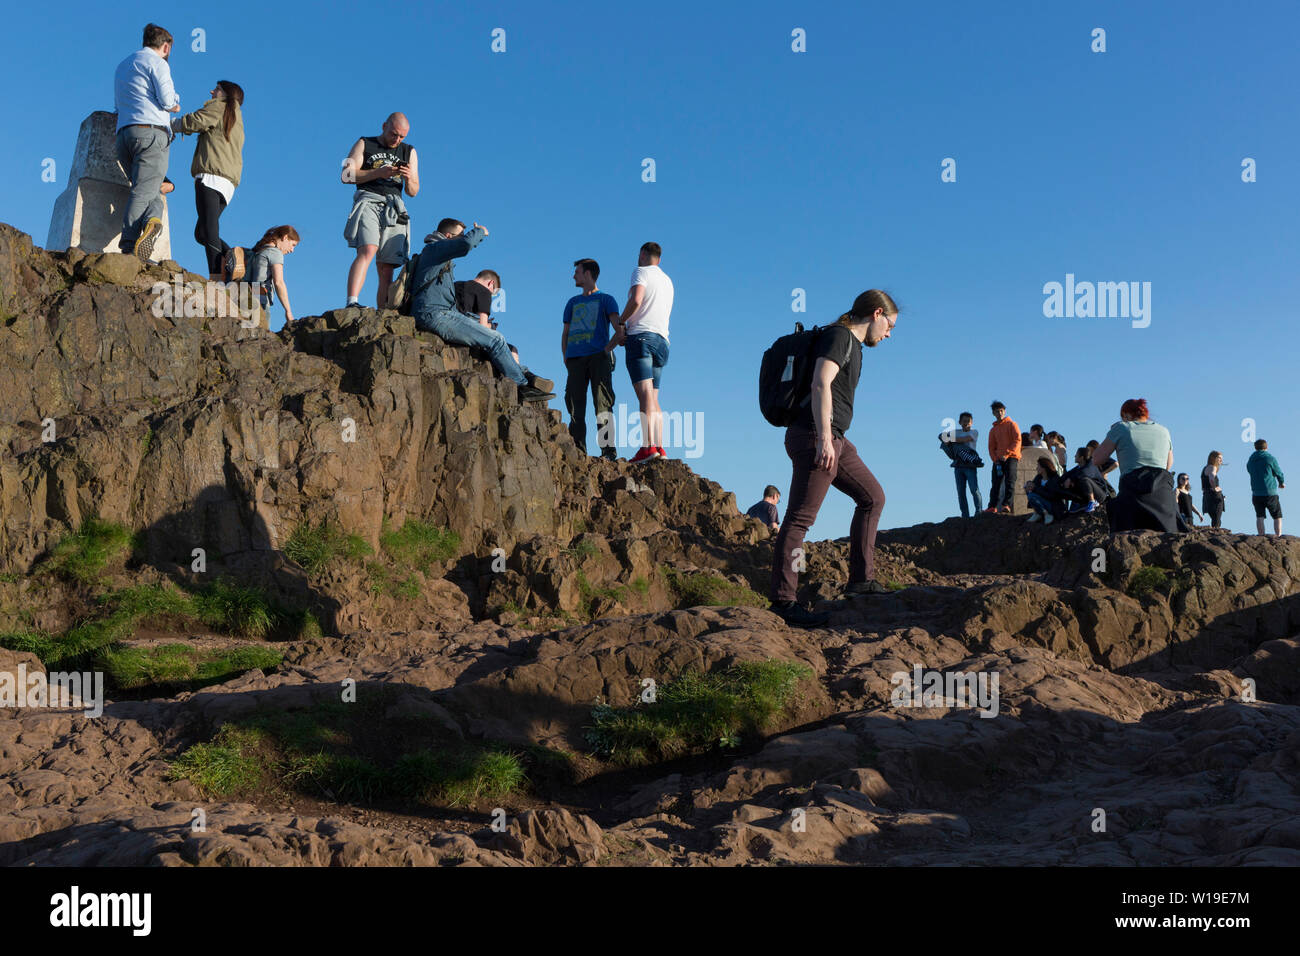 Walkers enjoy summer evening sunshine on the summit of Arthur's Seat in Holyrood Park, overlooking the city of Edinburgh, on 26th June 2019, in Edinburgh, Scotland. Arthur's Seat is an extinct volcano which is considered the main peak of the group of hills in Edinburgh, Scotland, which form most of Holyrood Park, described by Robert Louis Stevenson as 'a hill for magnitude, a mountain in virtue of its bold design'. The hill rises above the city to a height of 250.5 m (822 ft), providing excellent panoramic views of the city and beyond. Stock Photo